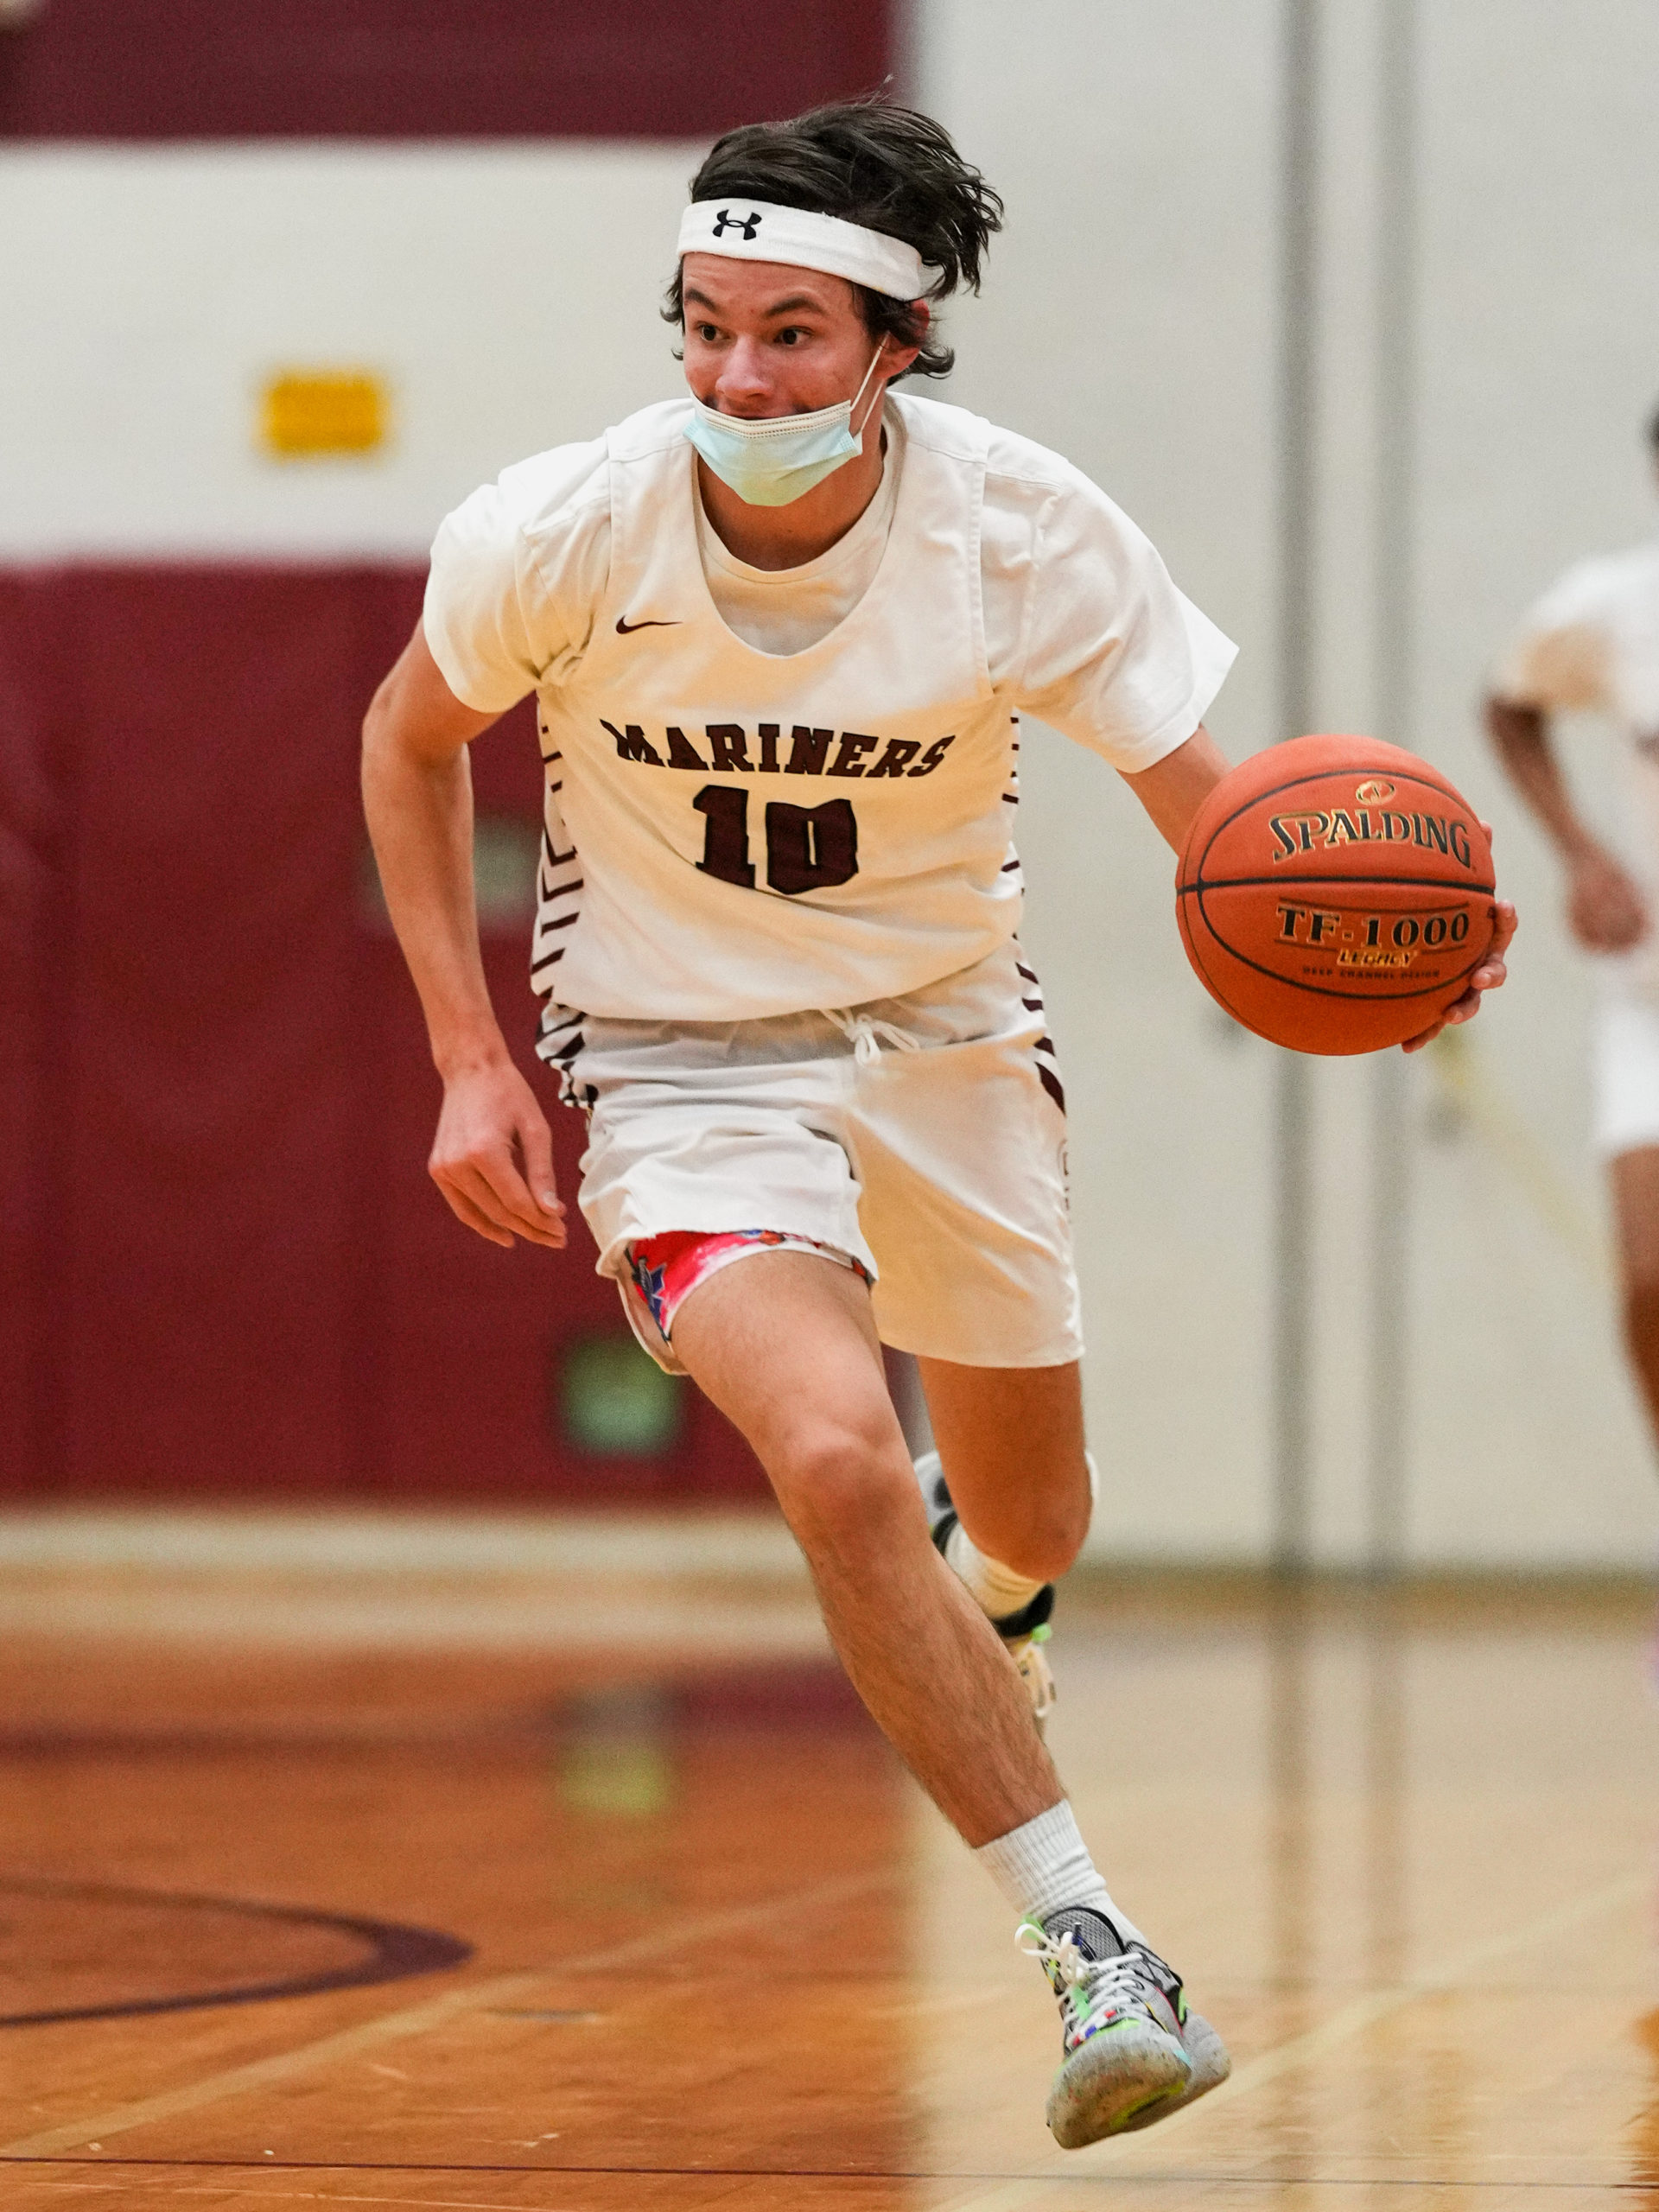 Southampton's Andrew Venesina scored 13 points in Friday night's victory over Westhampton Beach.